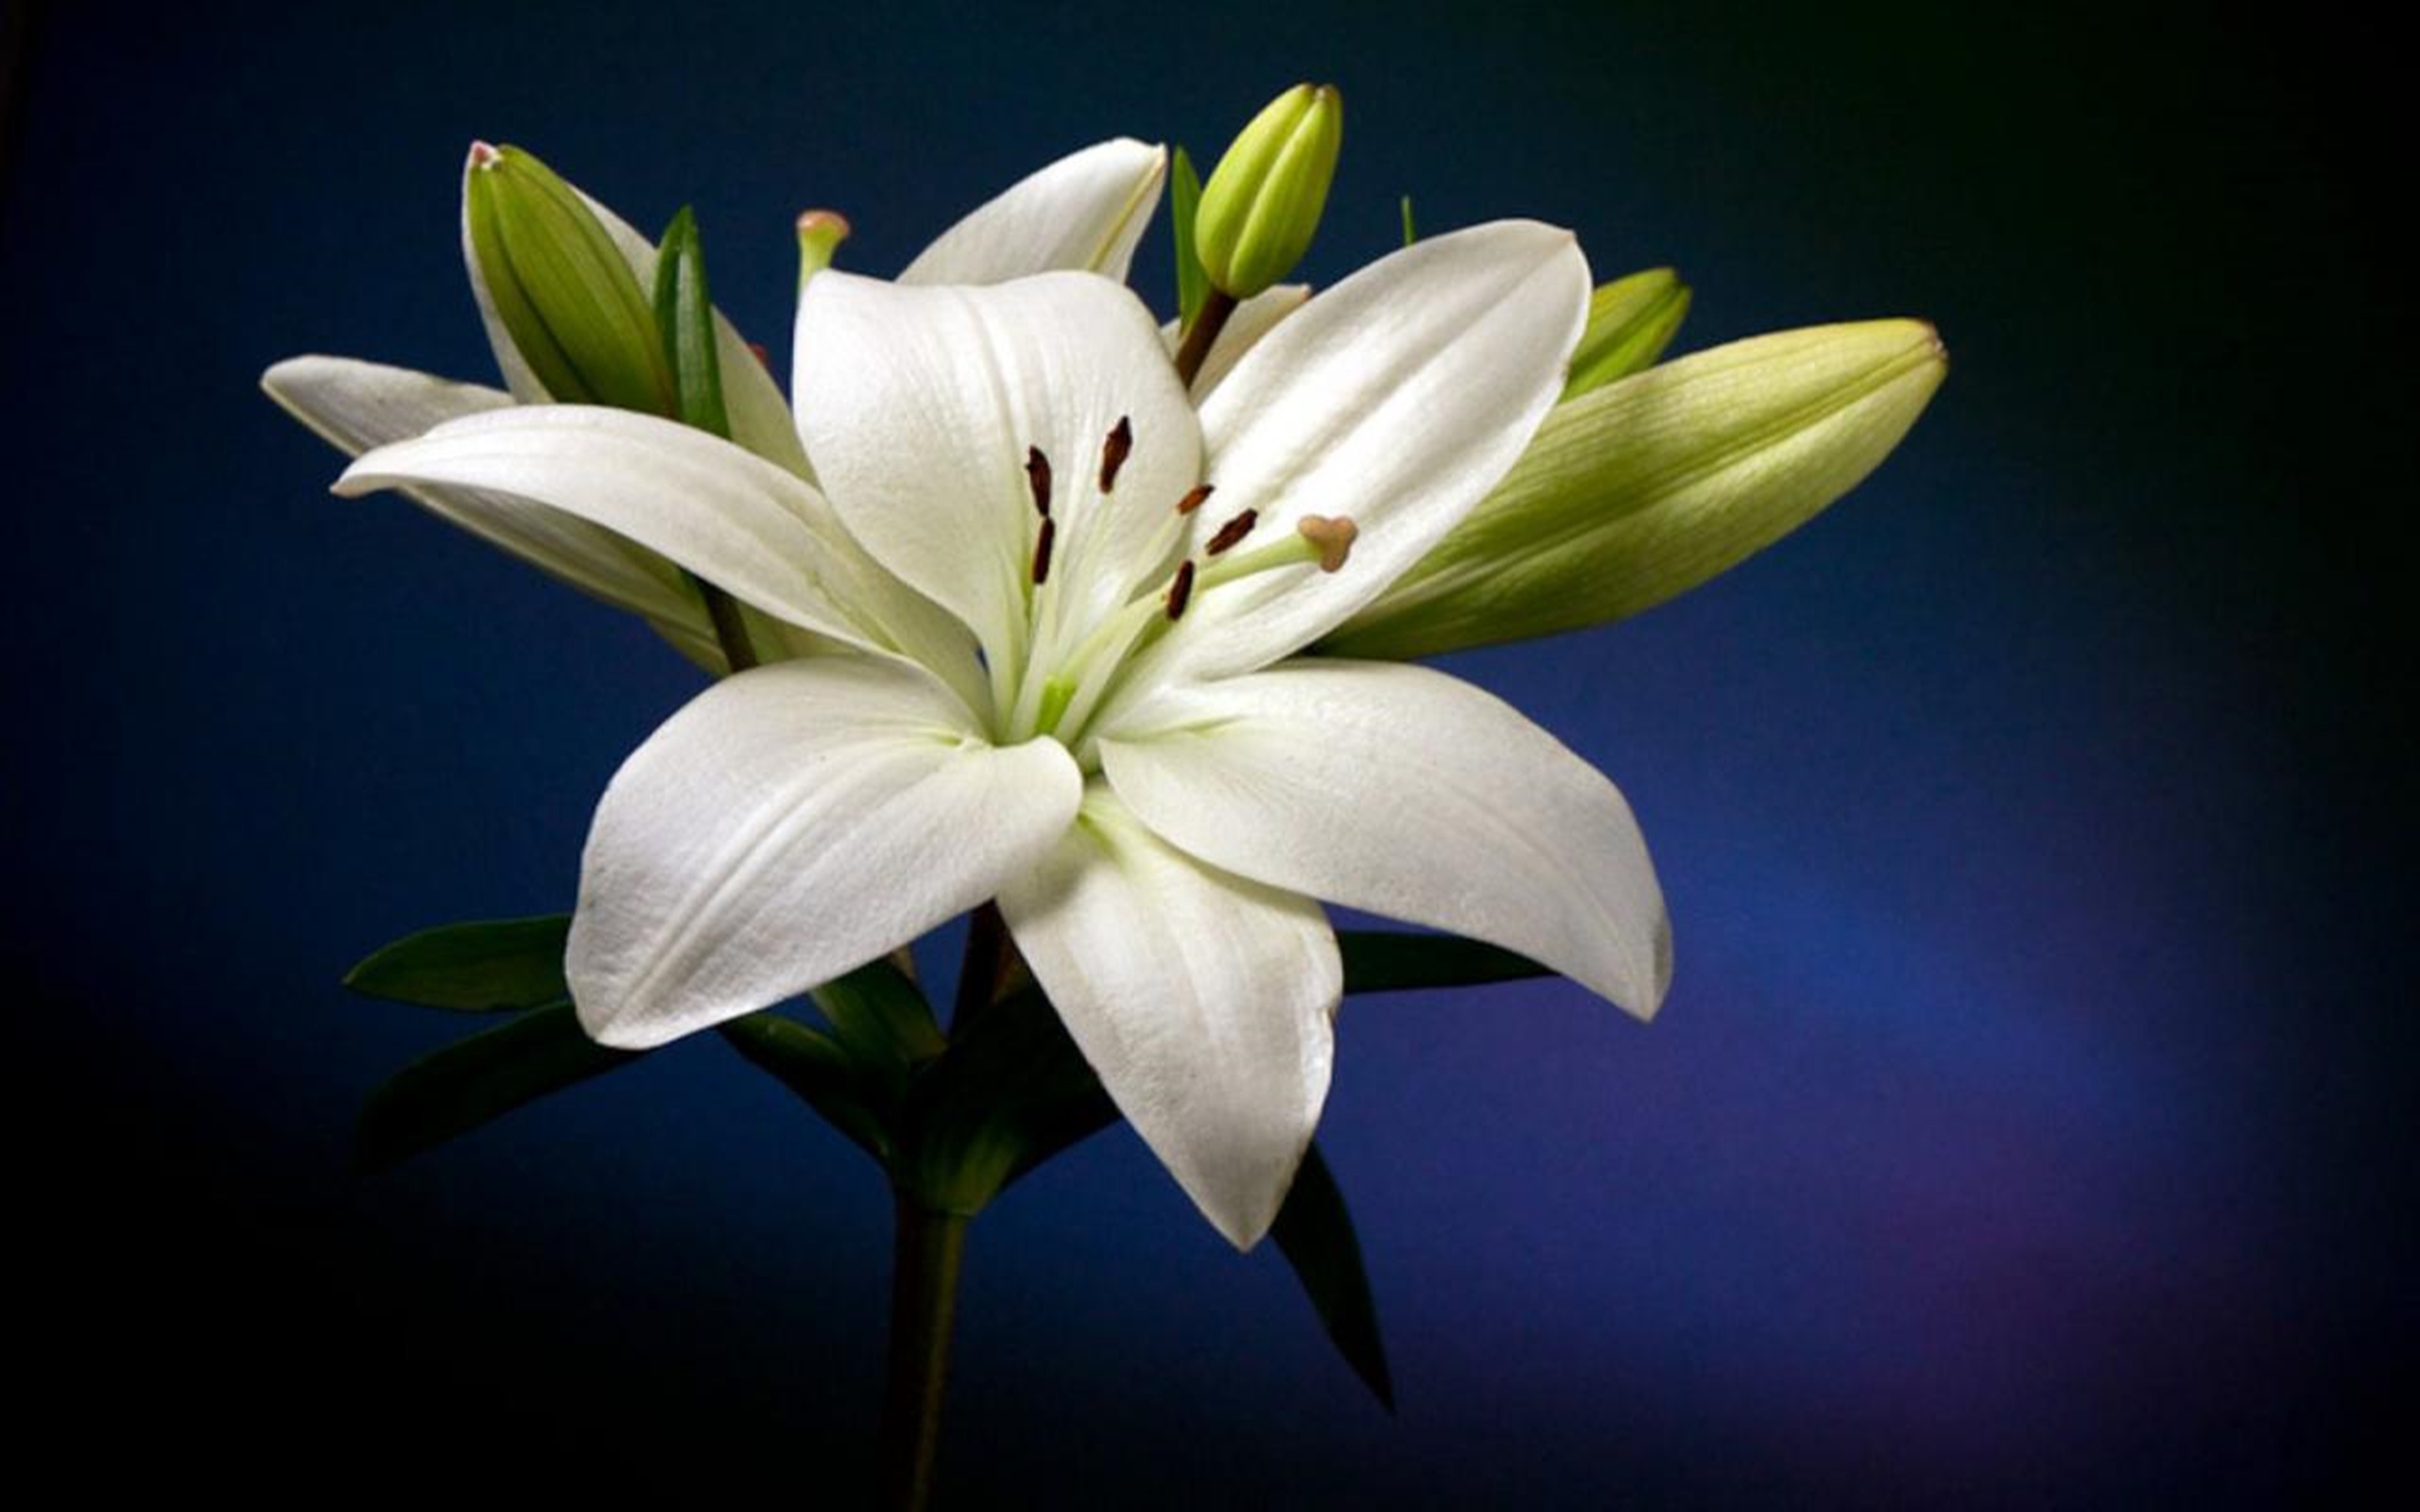 Beautiful White Lily Flower Hd Wallpaper : Wallpapers13.com